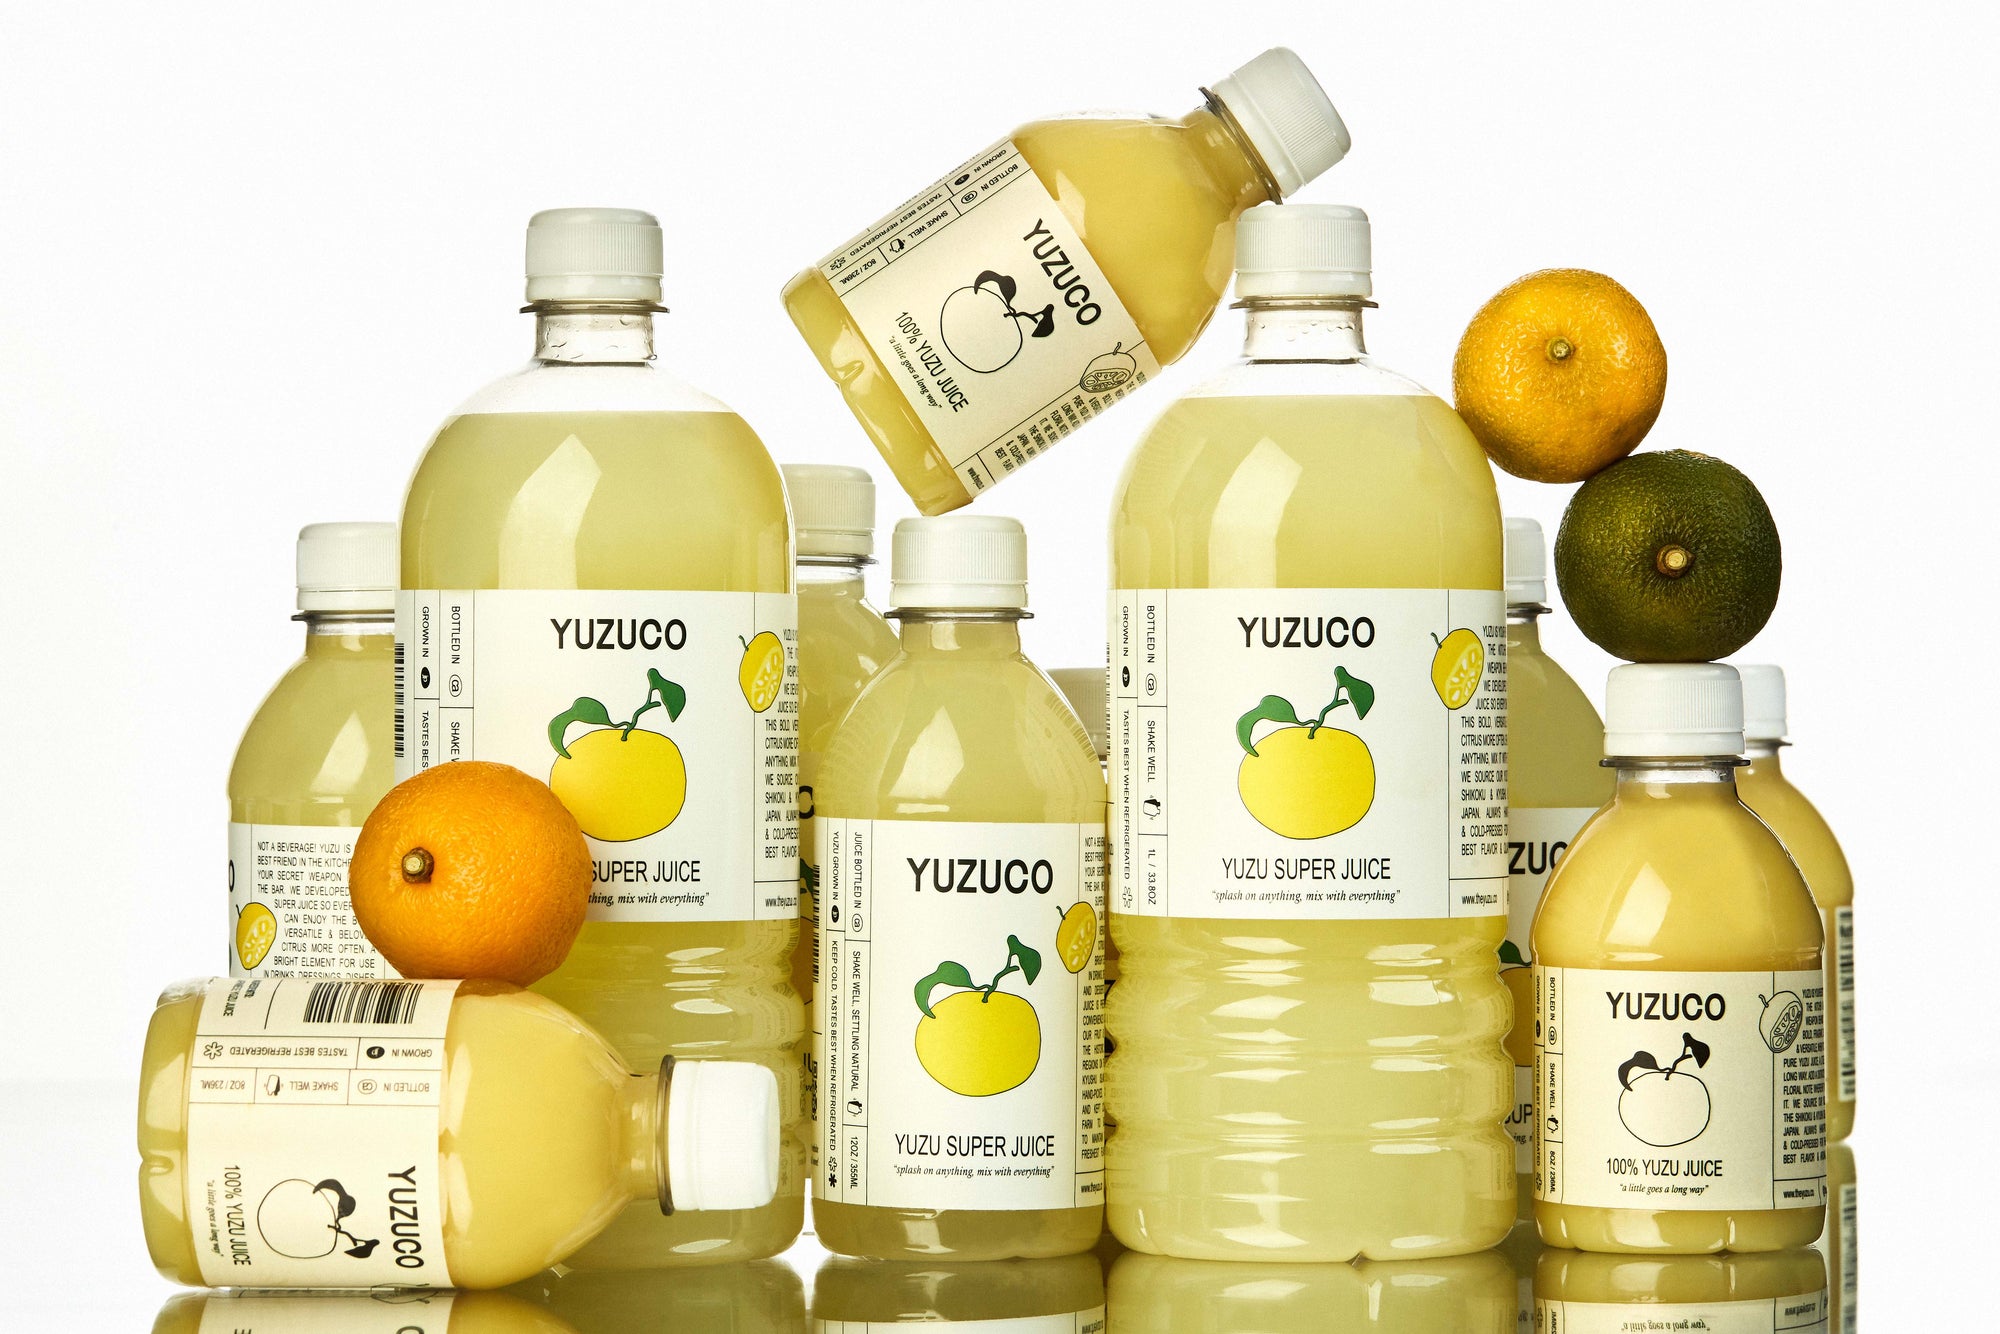 bottles of yuzuco juice all hanging out